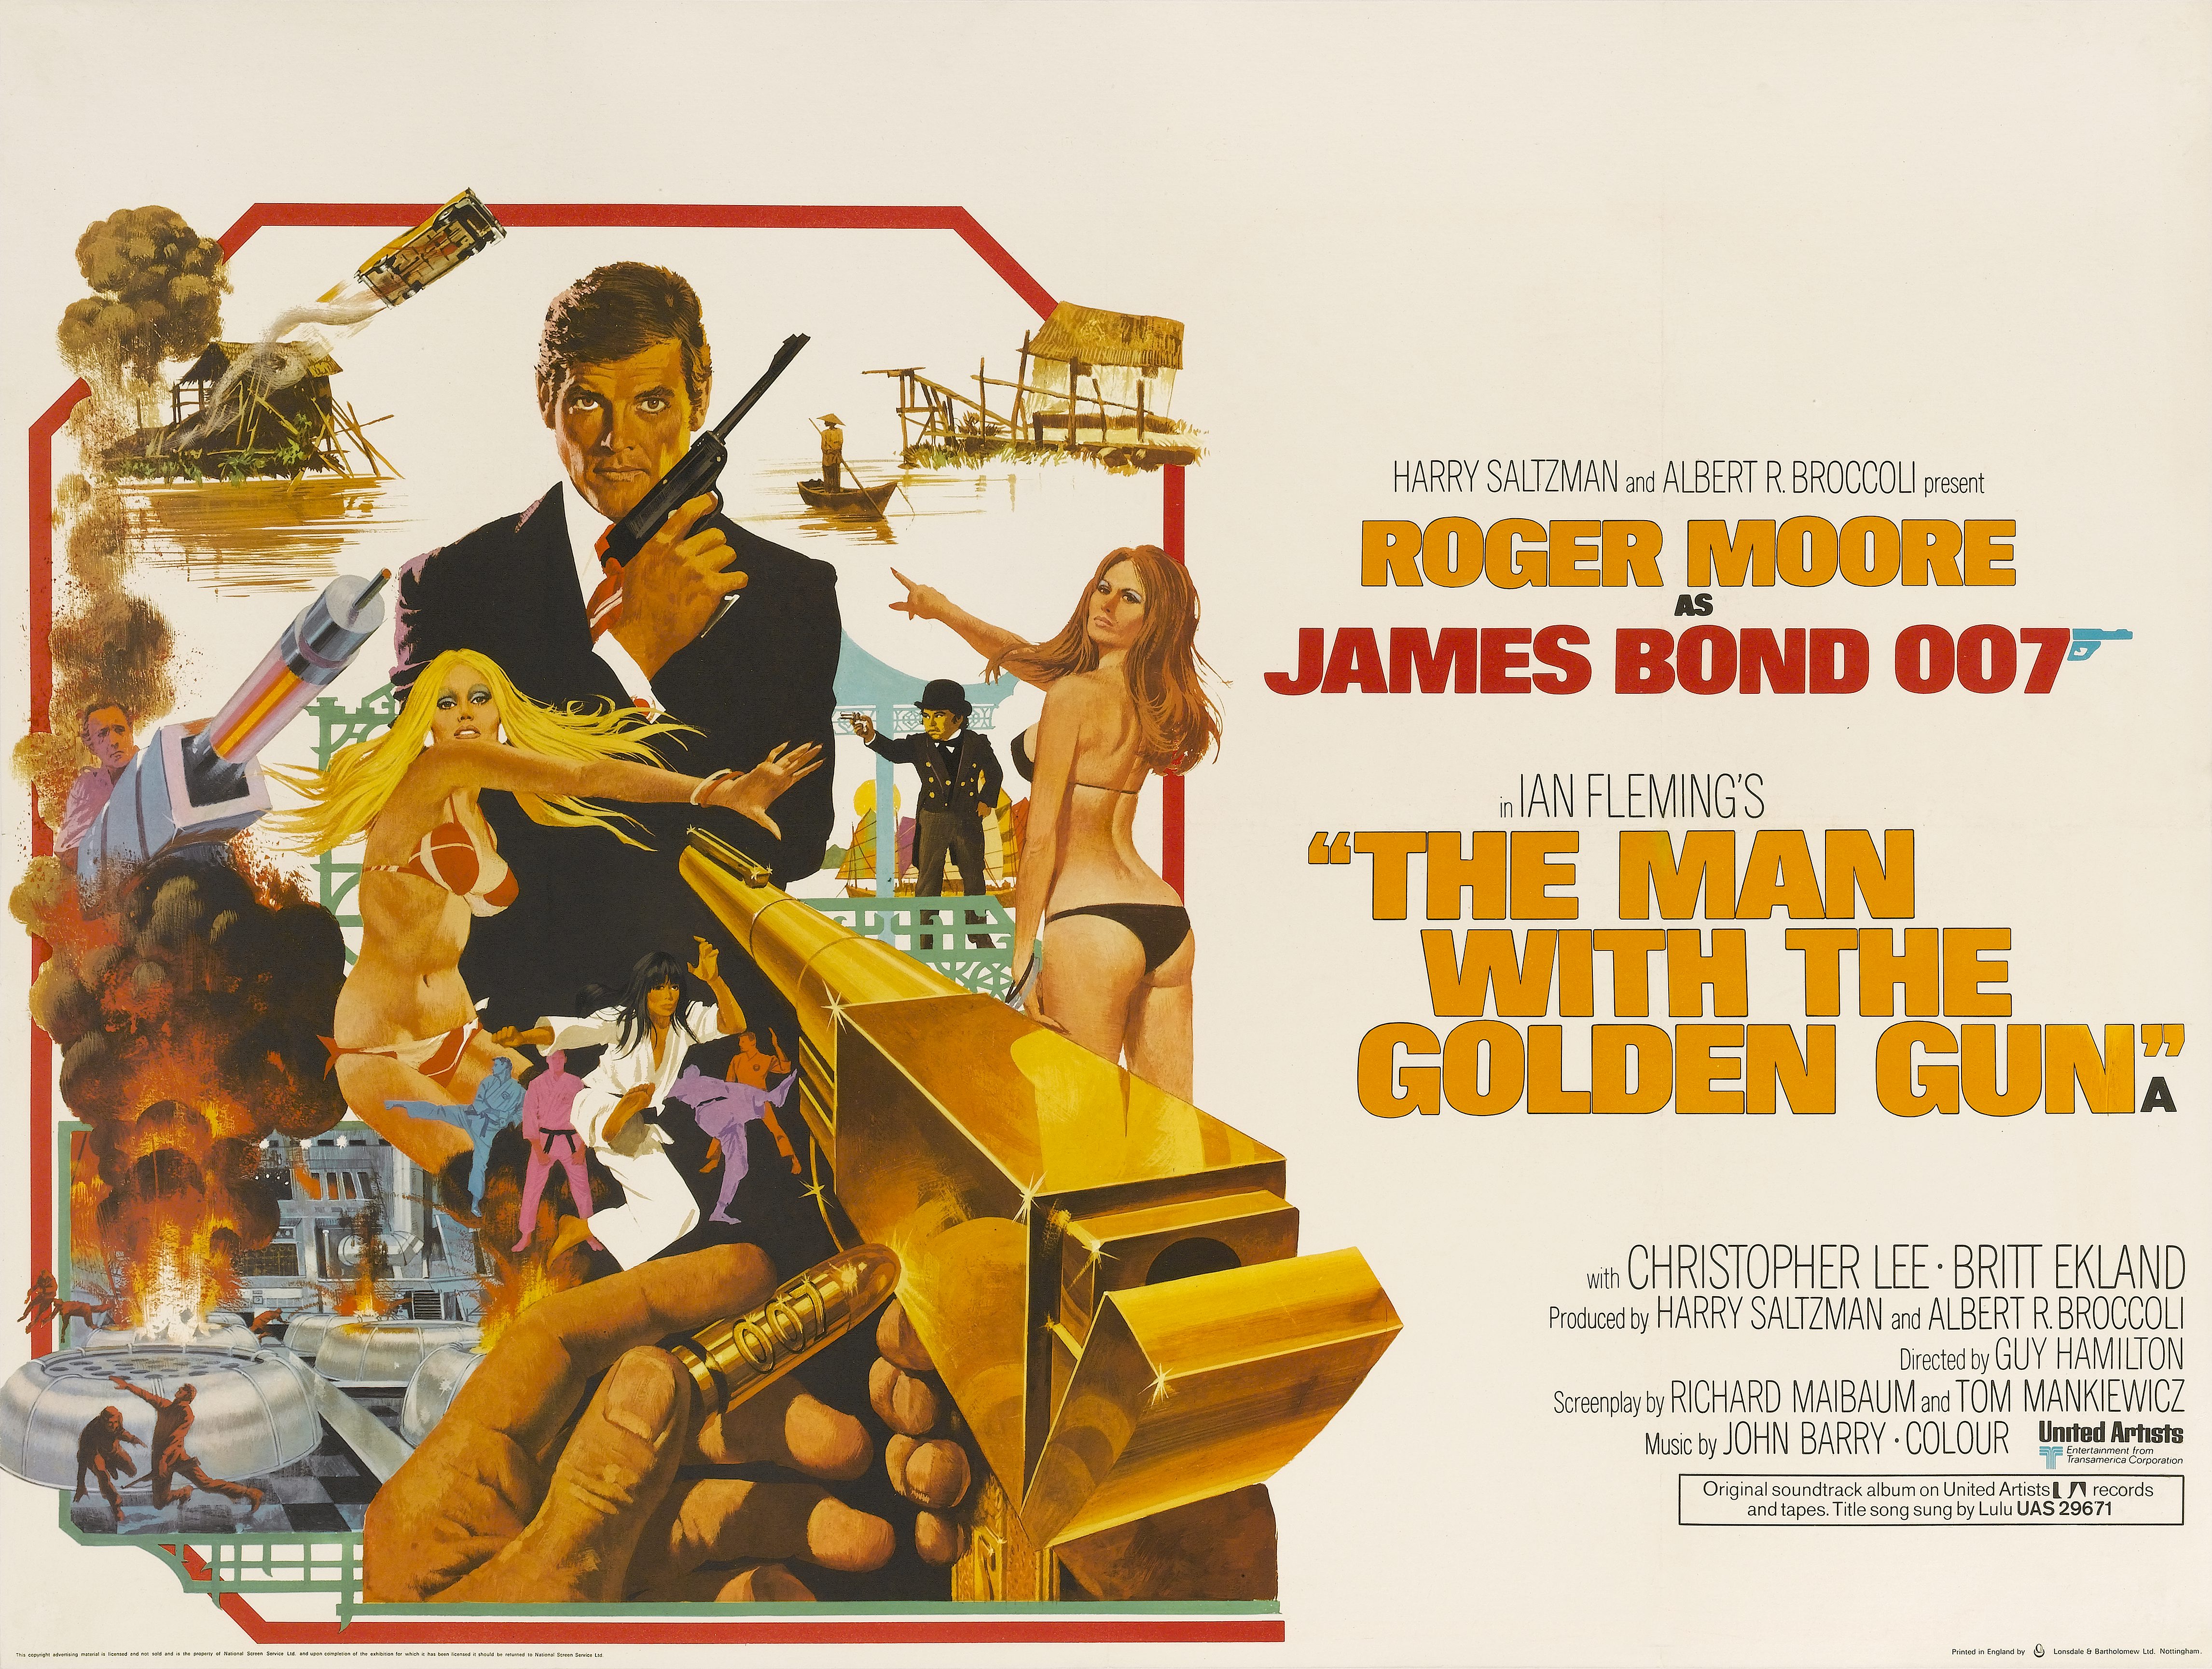 A poster for Guy Hamilton's action movie 'The Man with the Golden Gun' starring Roger Moore as 'James Bond' in 1974. | Source: Getty Images